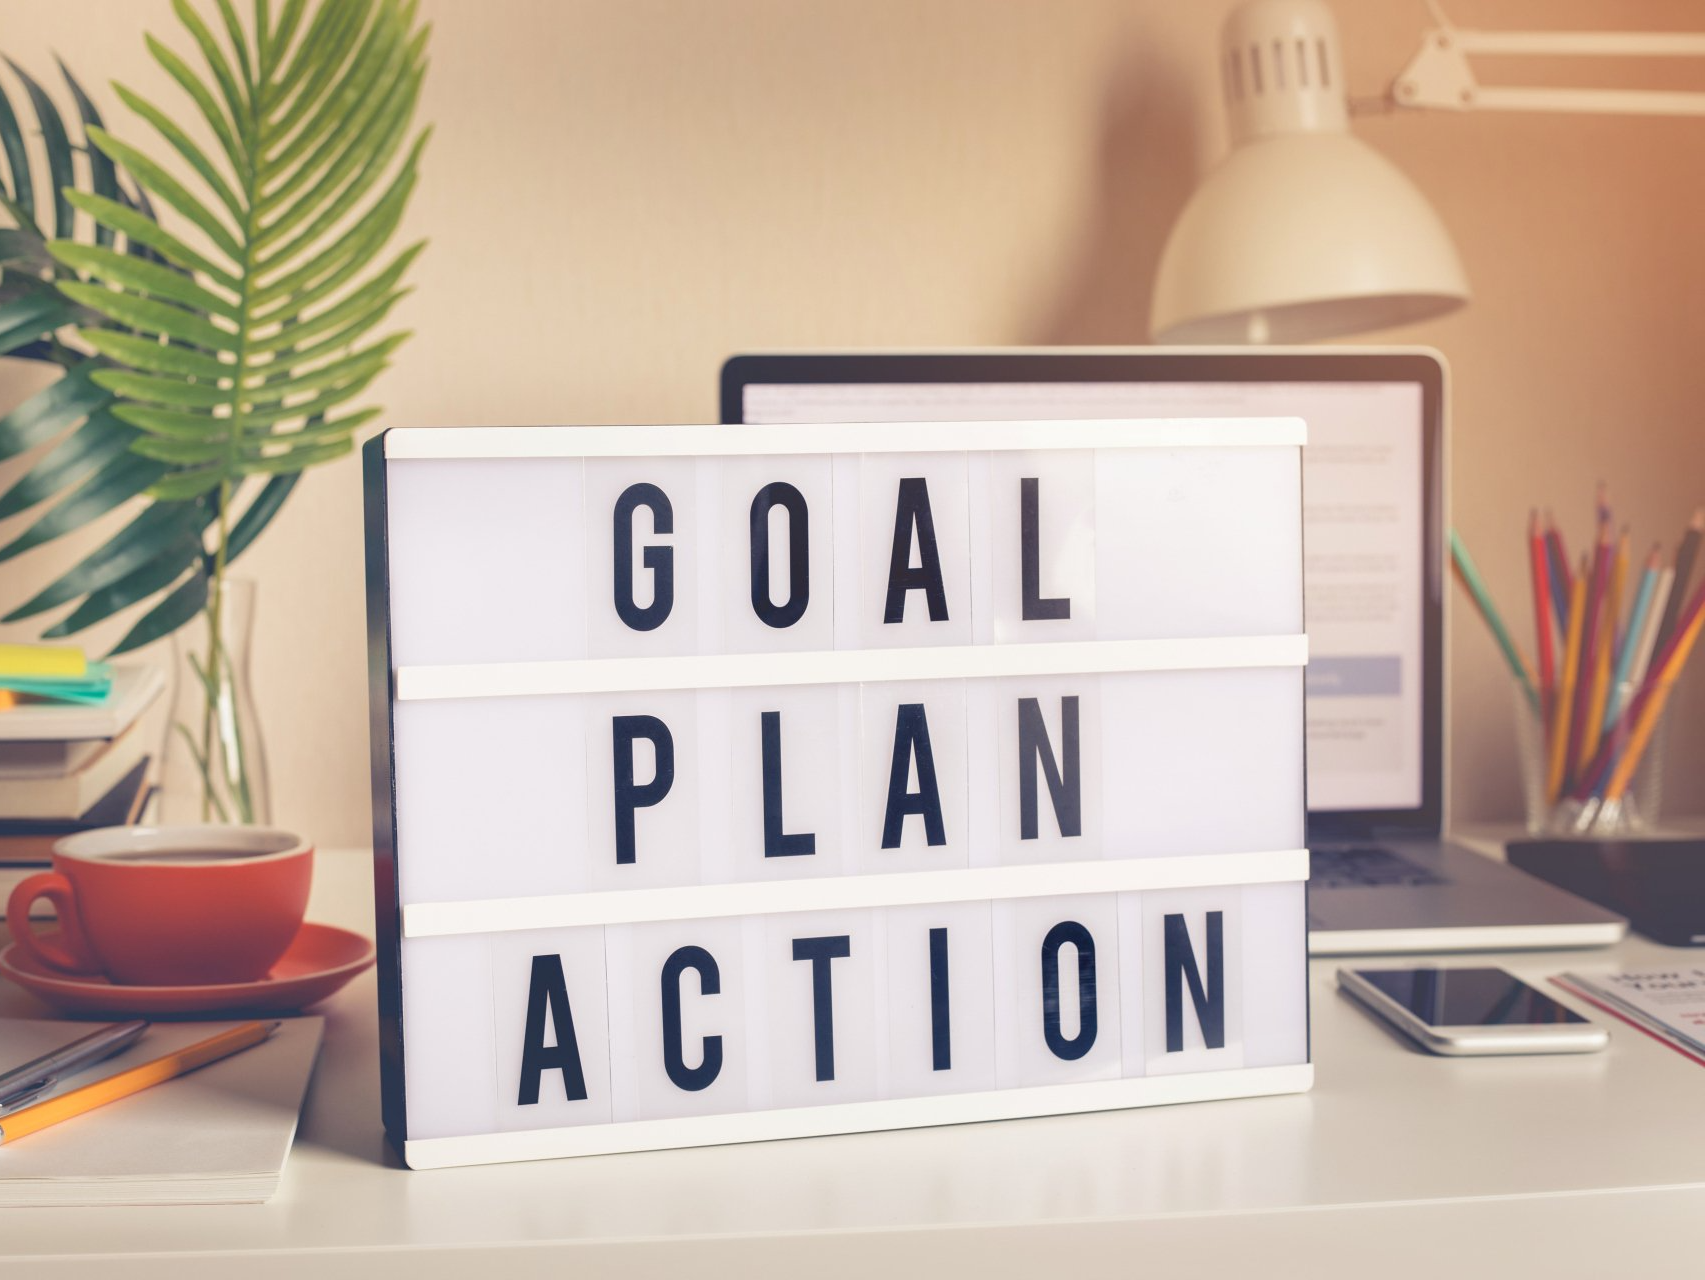 Image showing a board with the words stacked, 'Goal', 'Plan', 'Action'